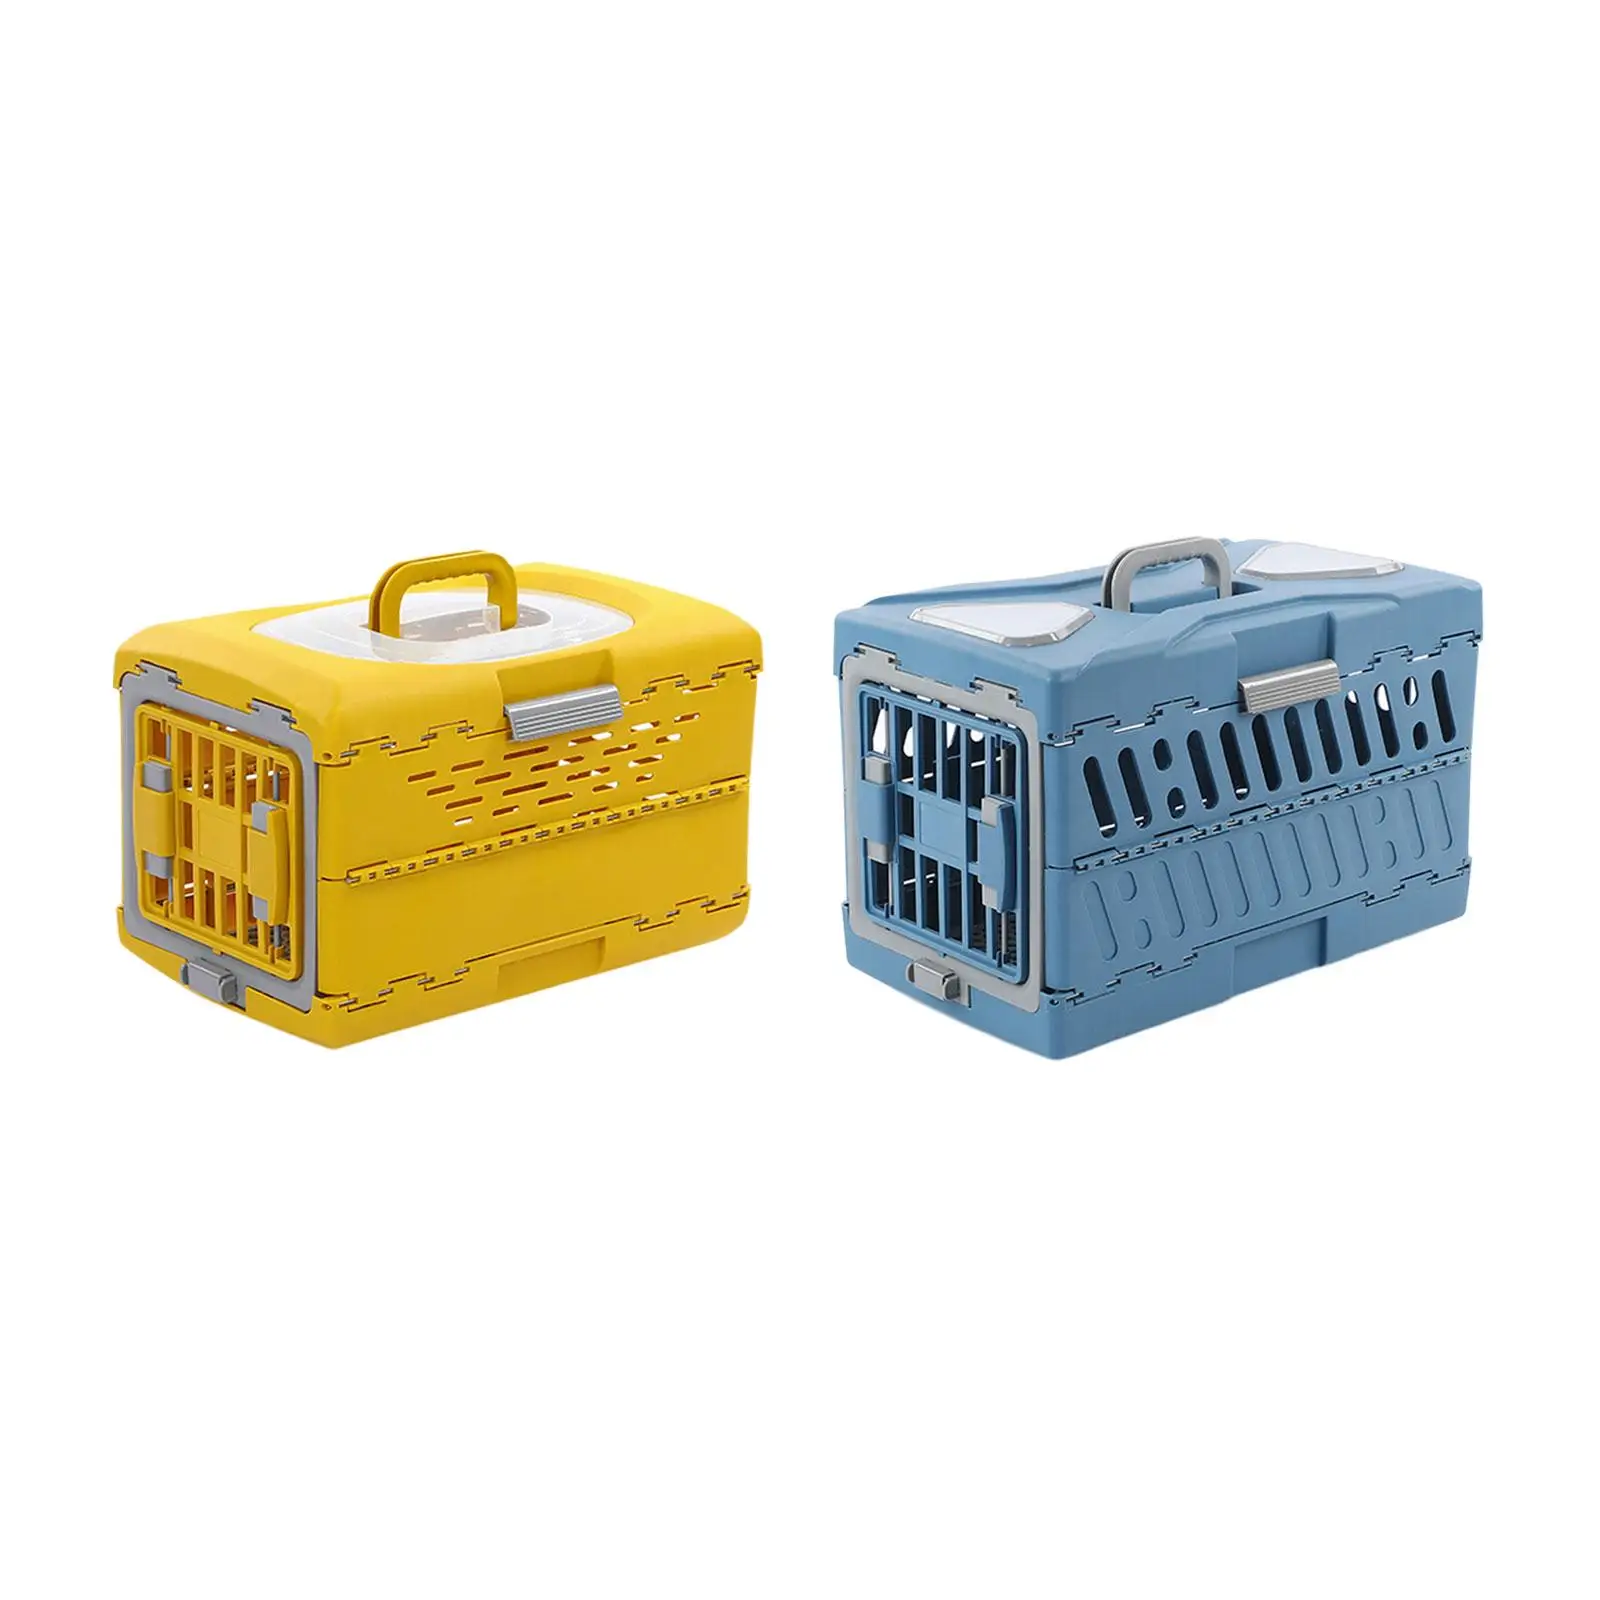 Collapsible Puppy Crate Folding Portable Dog Kennel for Puppy Small Dogs Cat